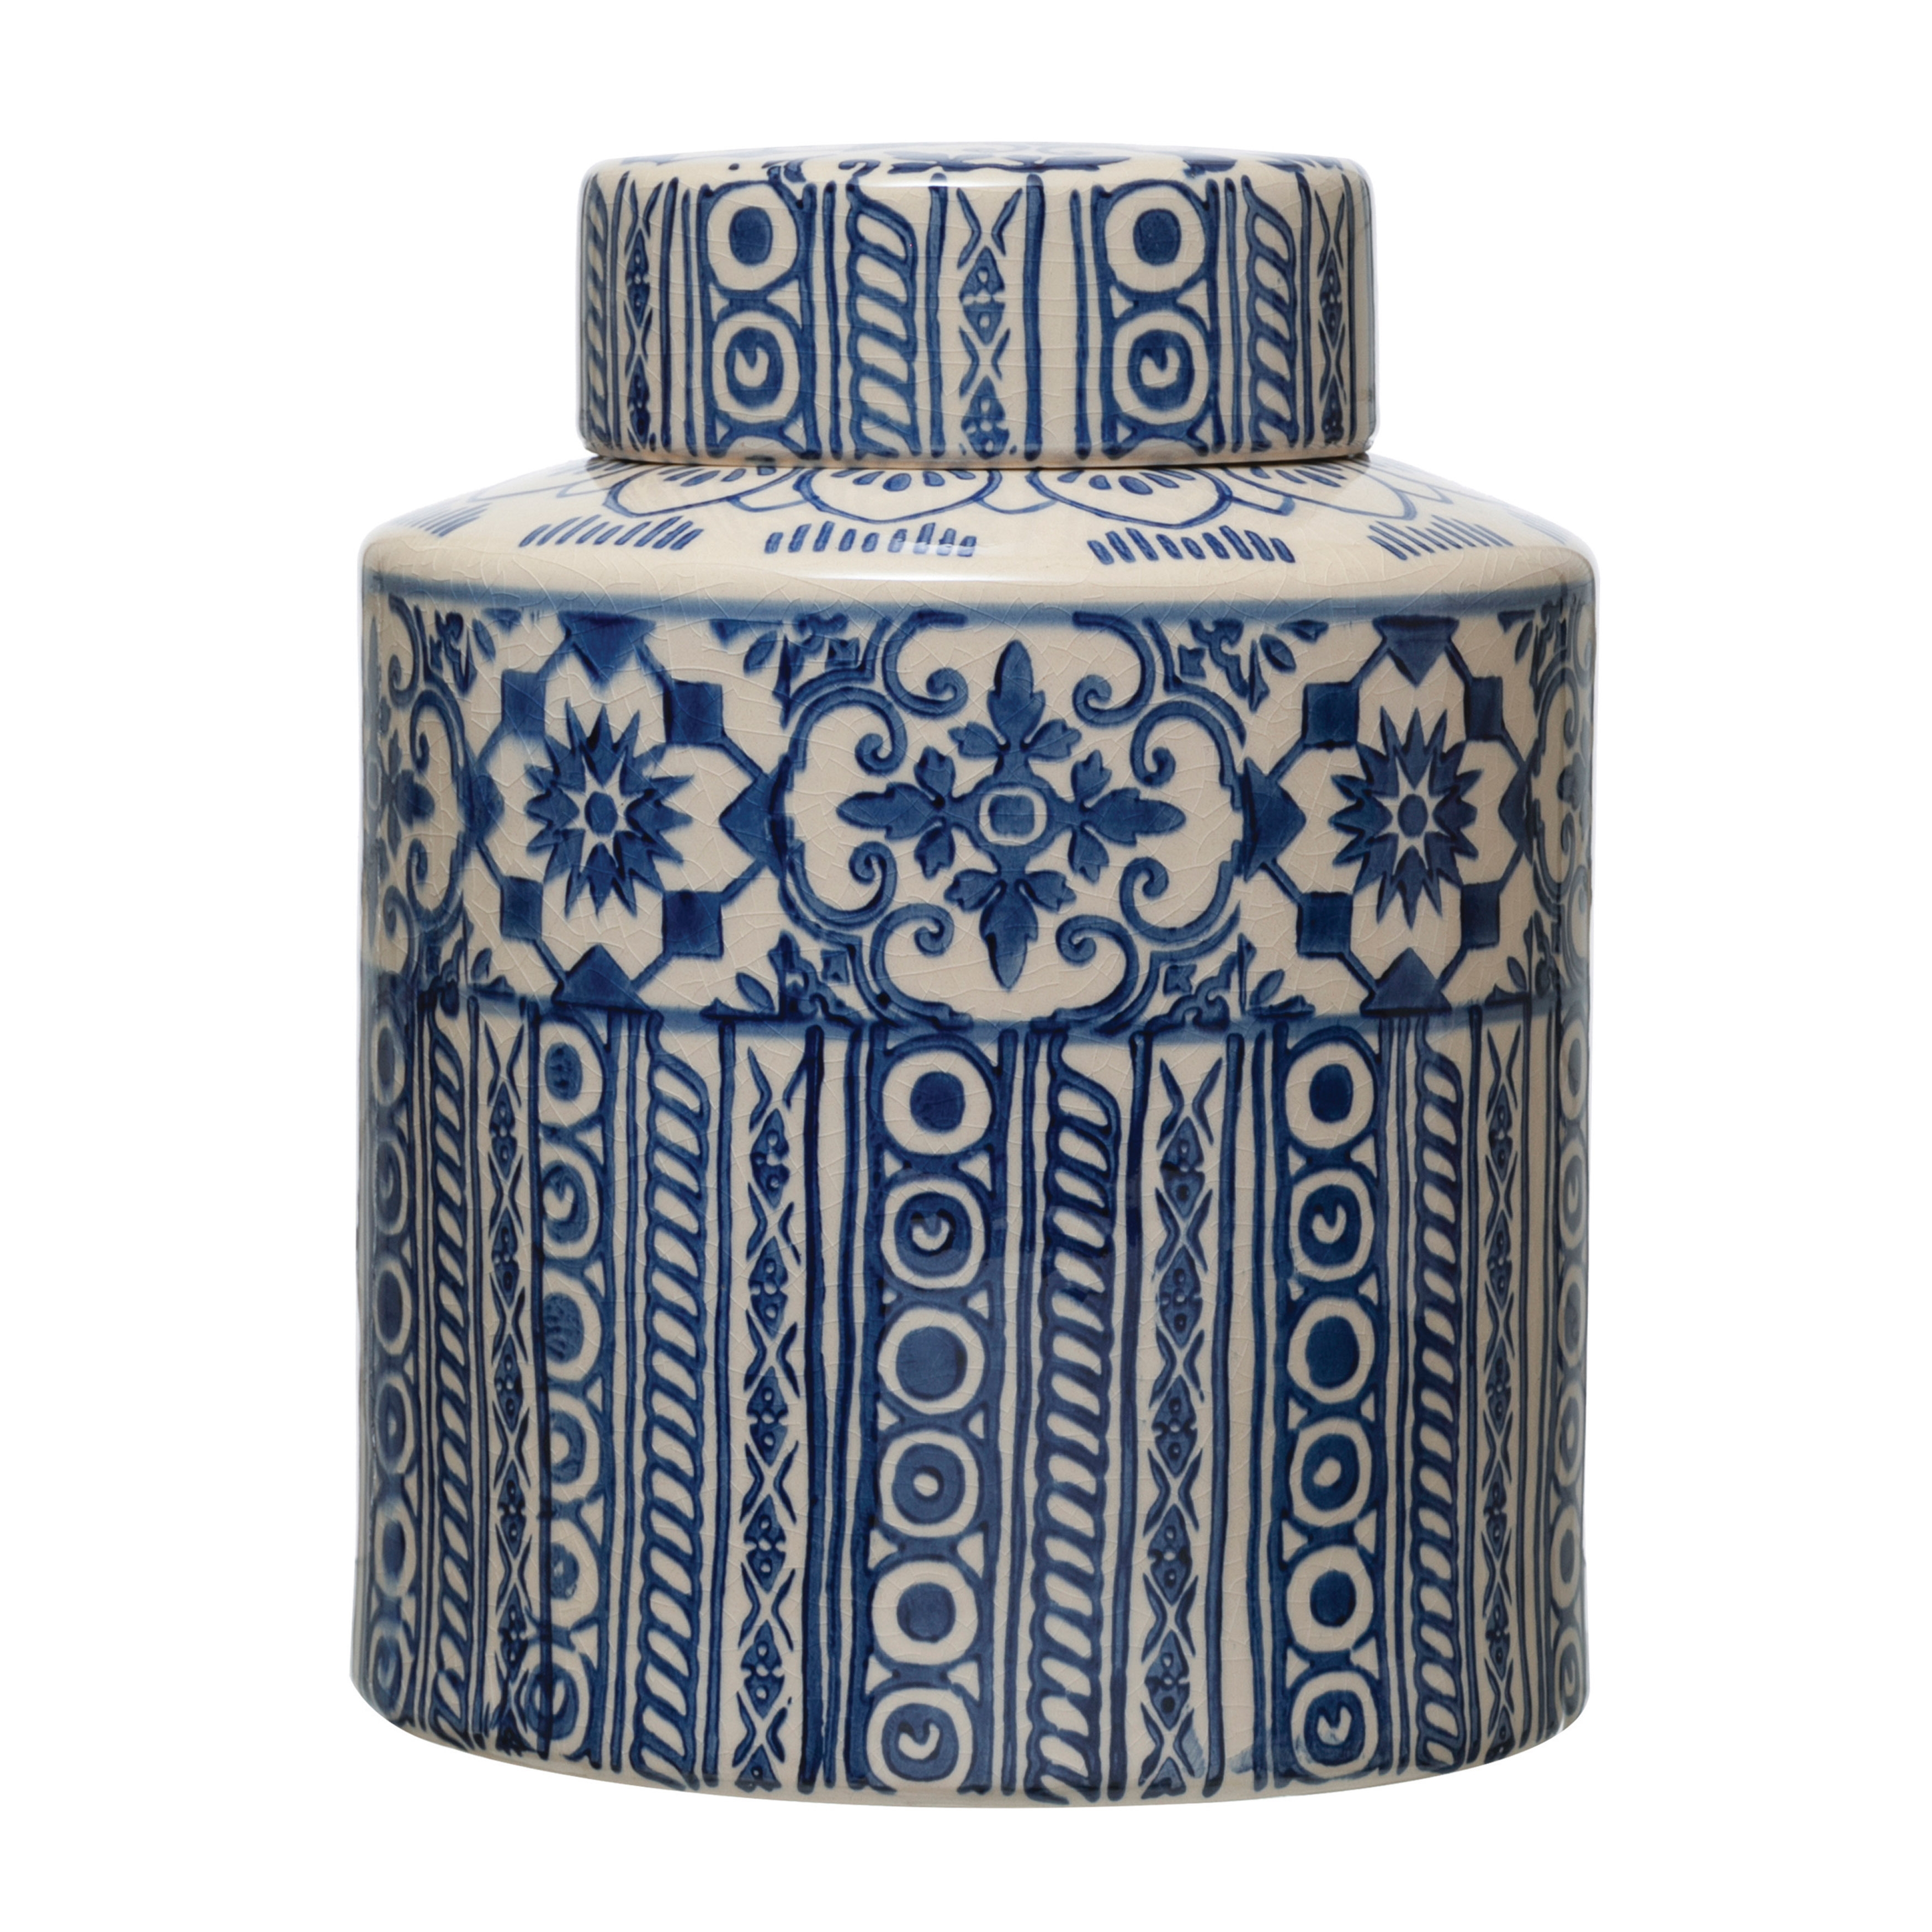 Decorative Stoneware Ginger Jar with Pattern, Blue & Cream Color - Image 0